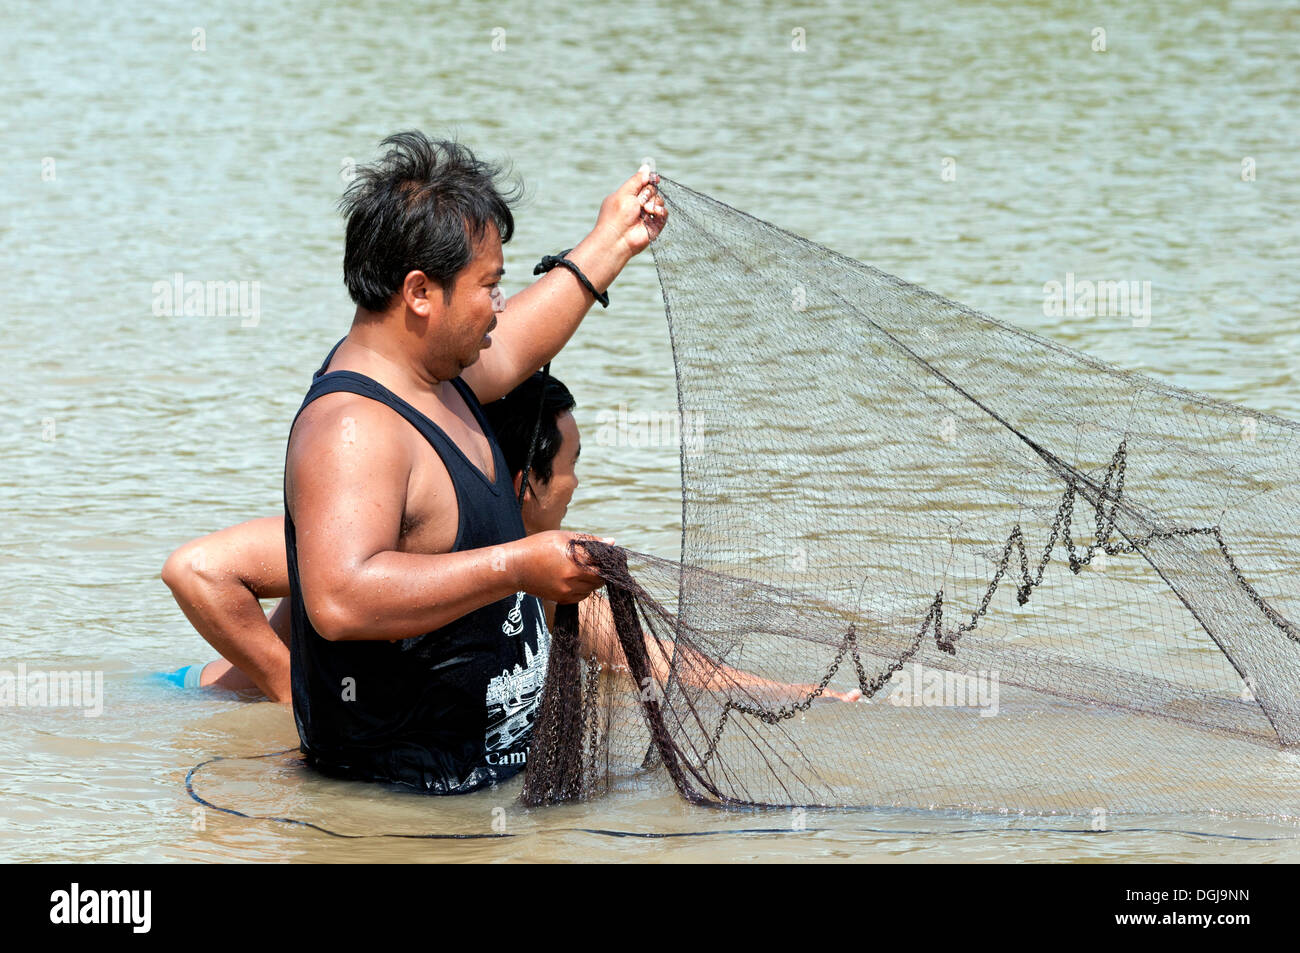 Fishermen putting out a fishing net in the Sangkae river